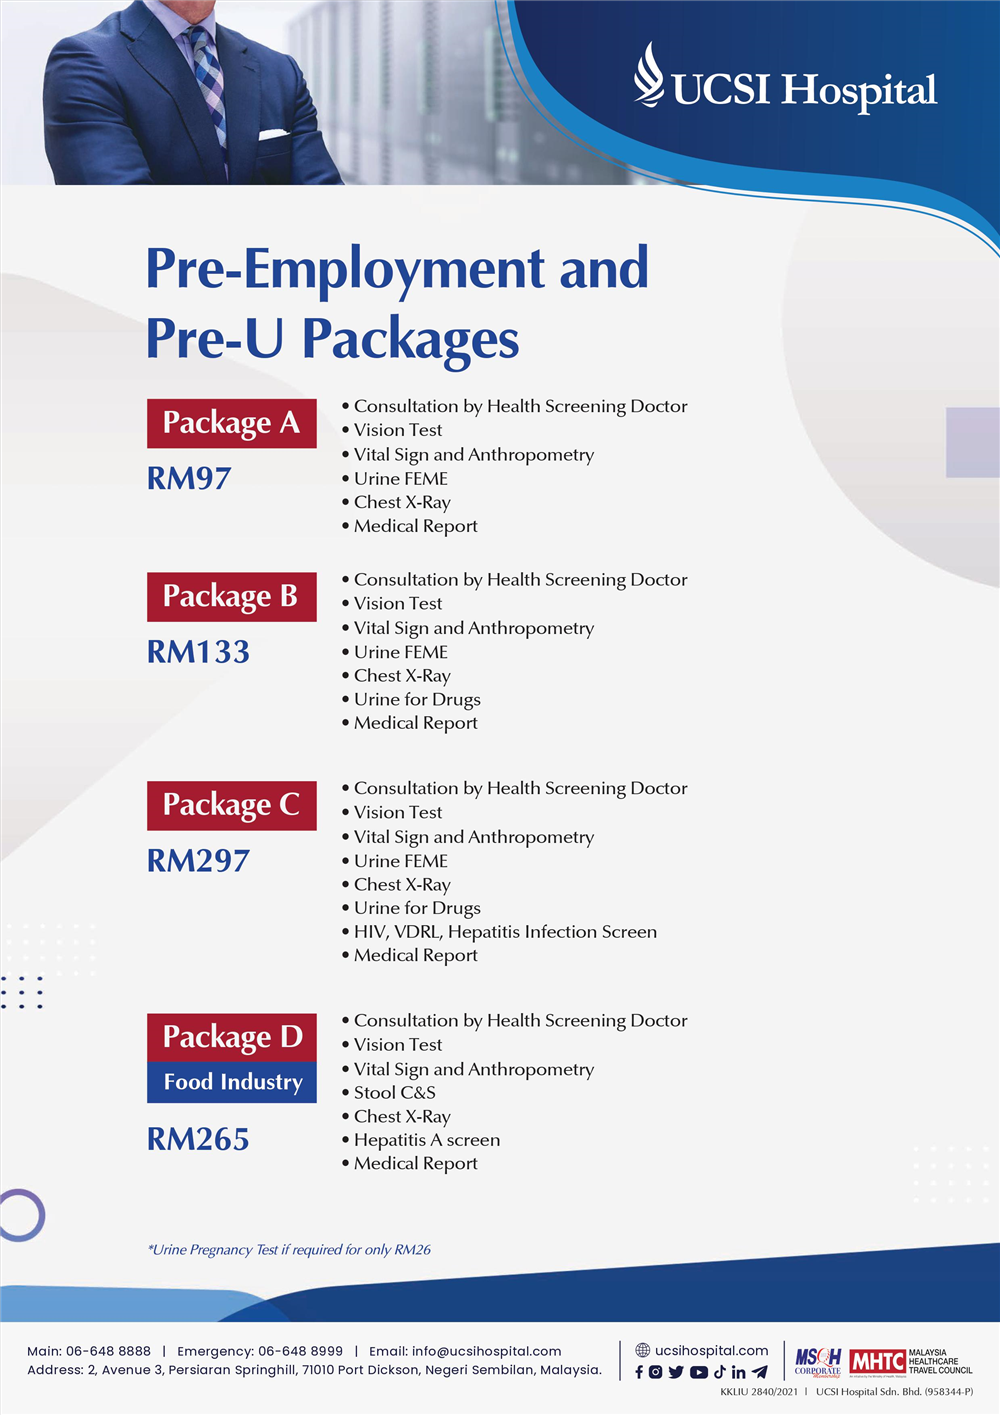 Pre-Employment & Pre-U Packages